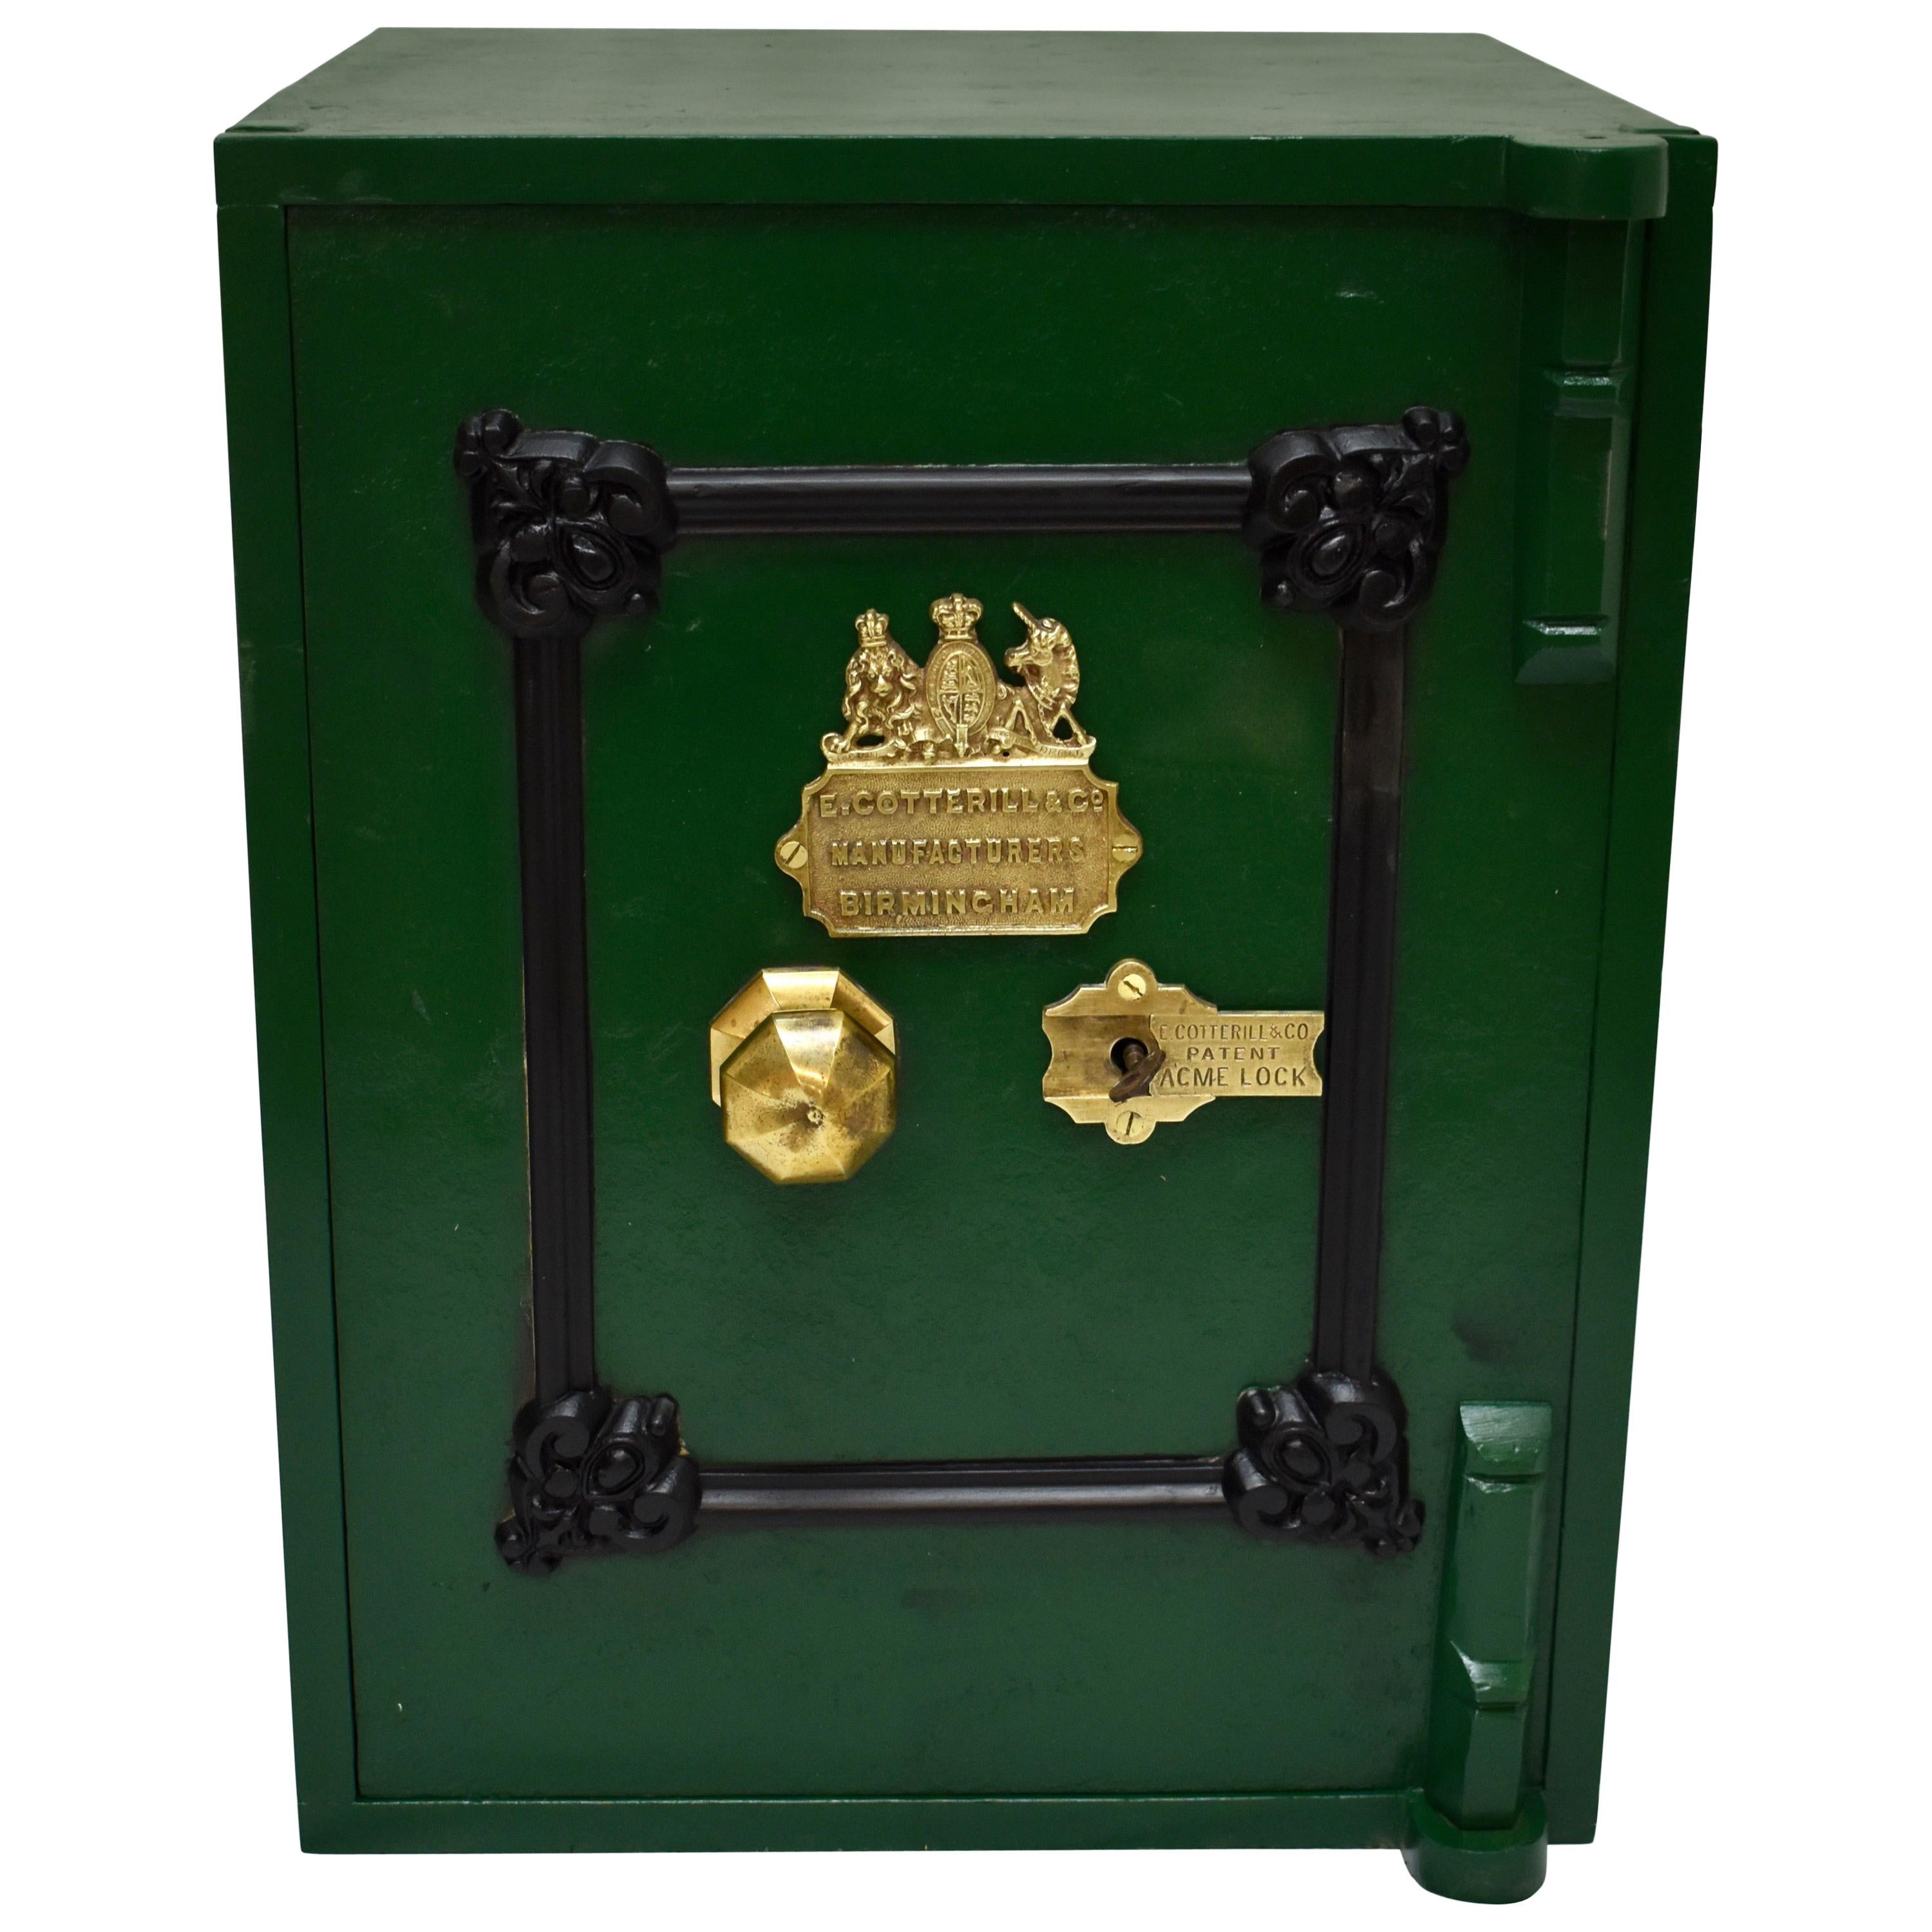 Cast Iron Floor Safe by E. Cotterill & Co., England, 1870